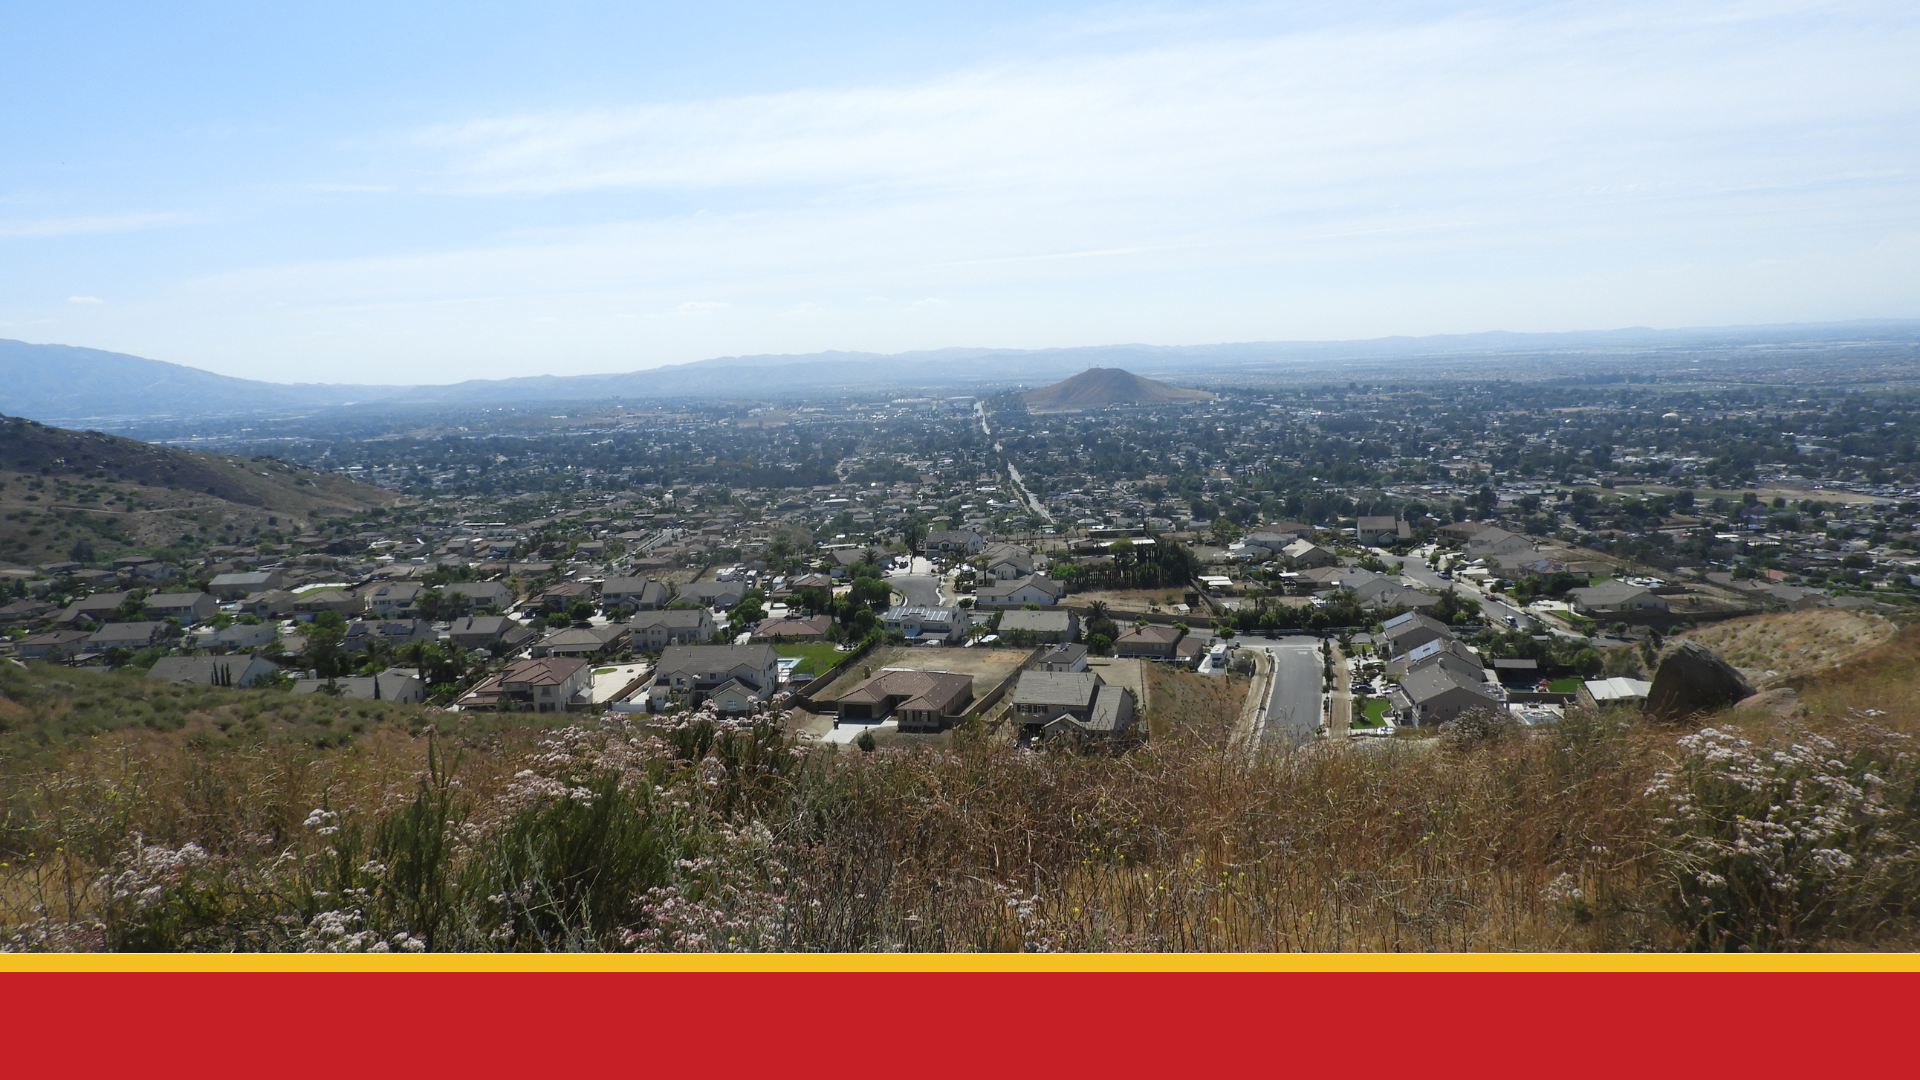 Hilltop view of the City of Norco, CA